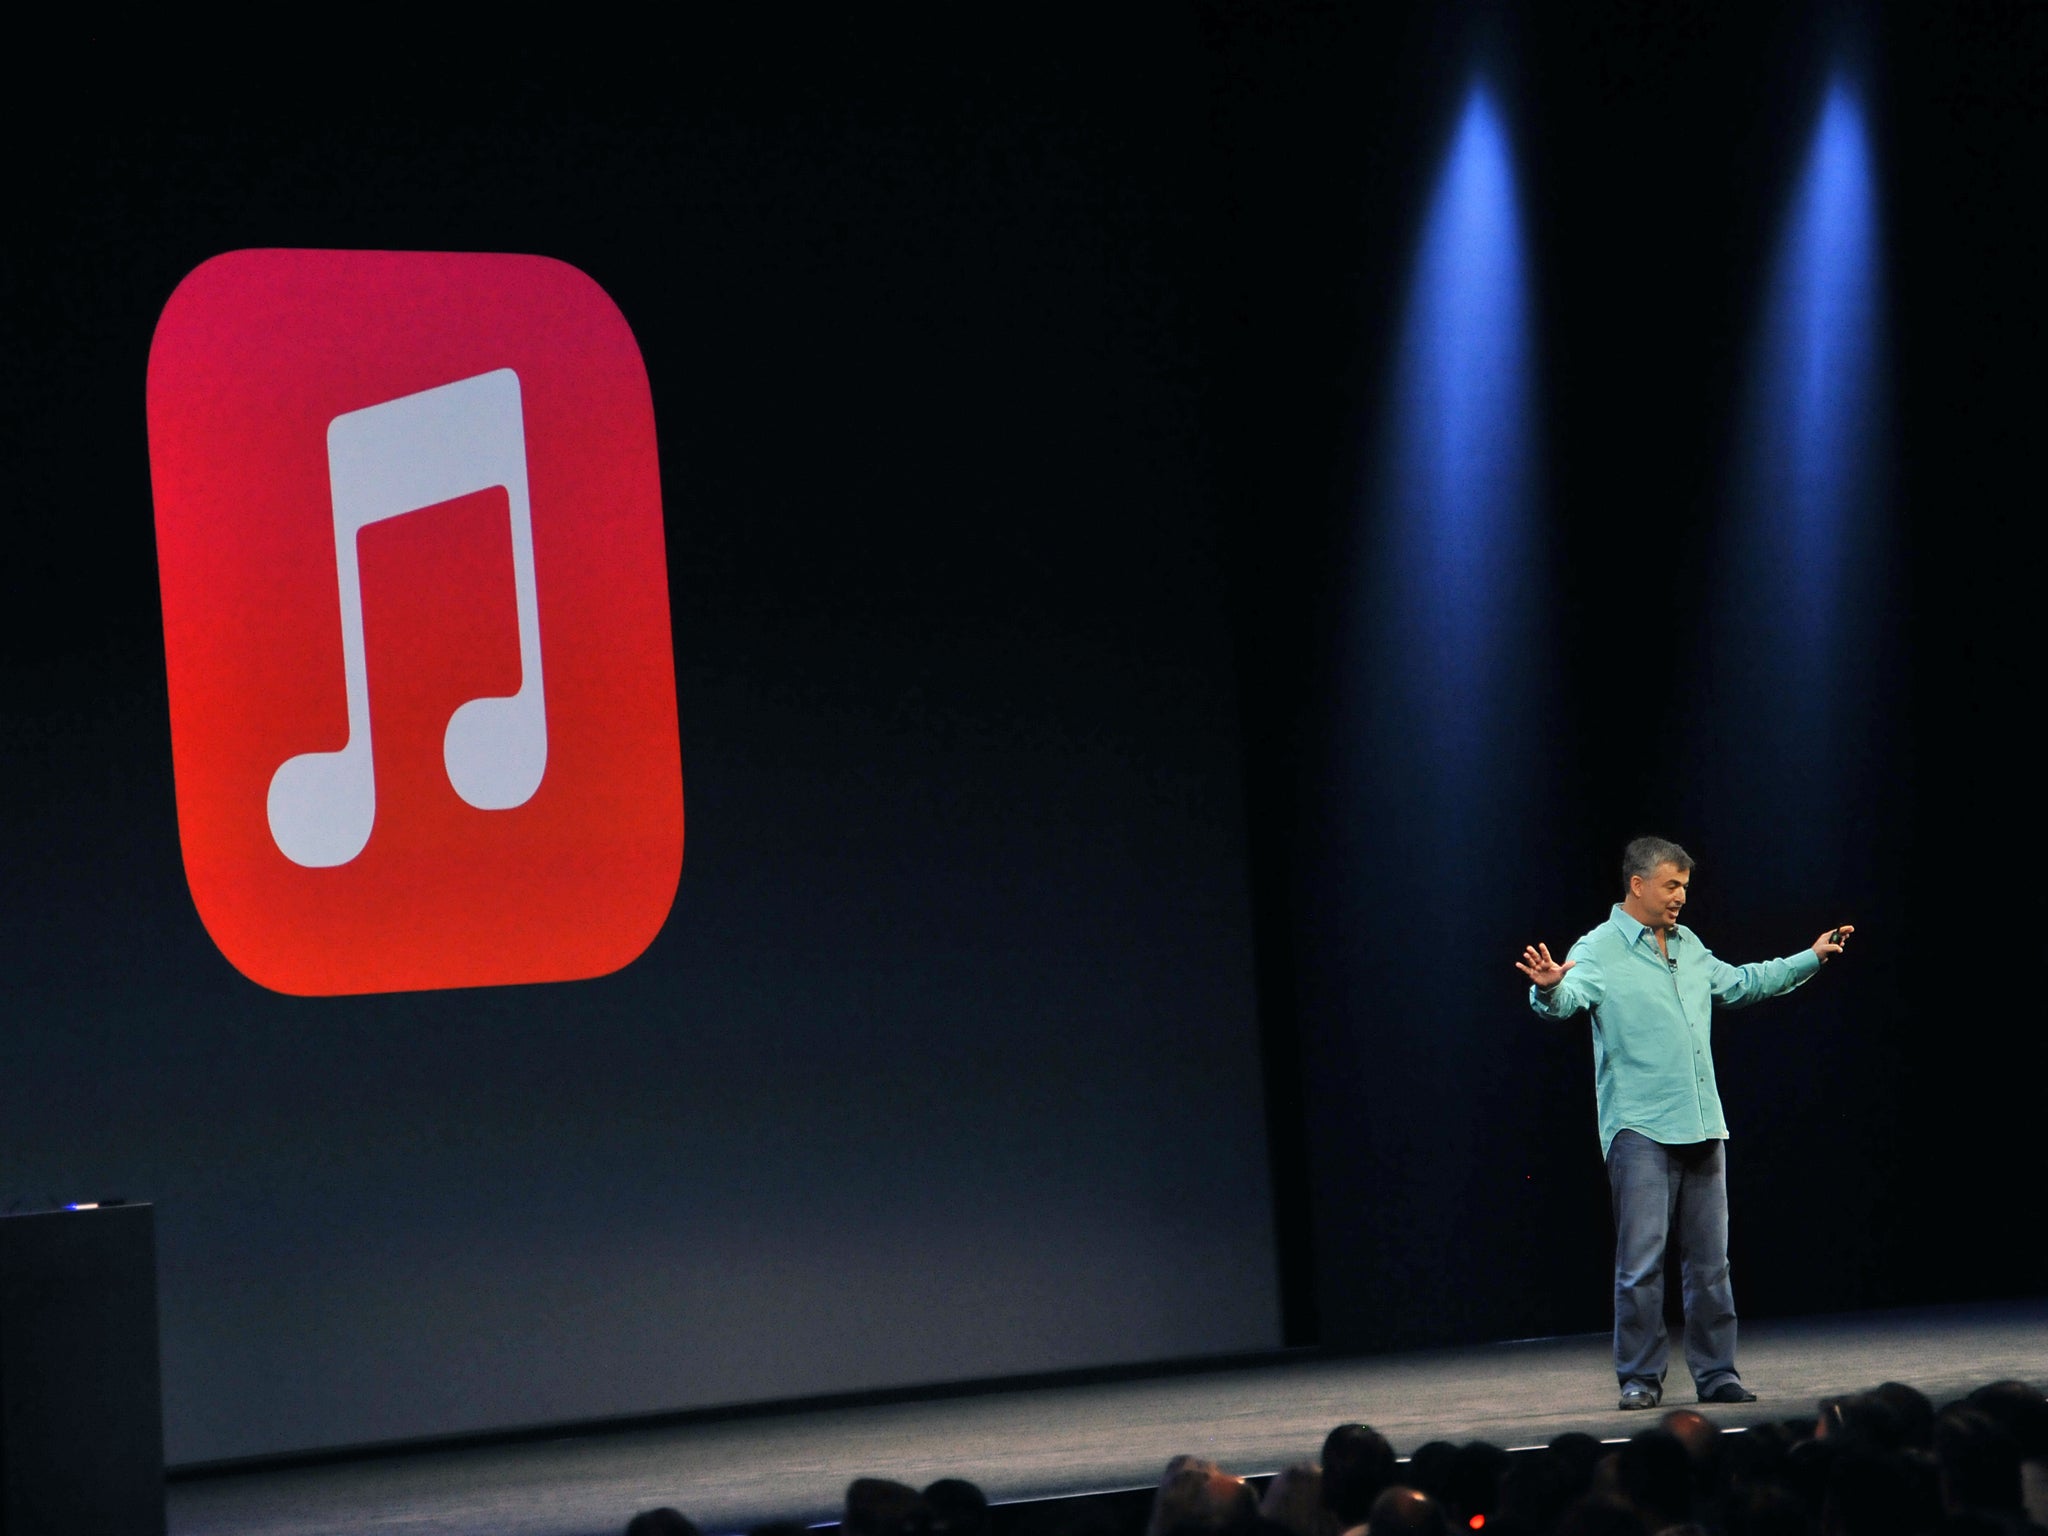 Eddy Cue, Apple's Senior Vice President of Internet Software and Services, introduces iTunes Radio at Apple's Worldwide Developer Conference (WWDC) in San Francisco in 2013